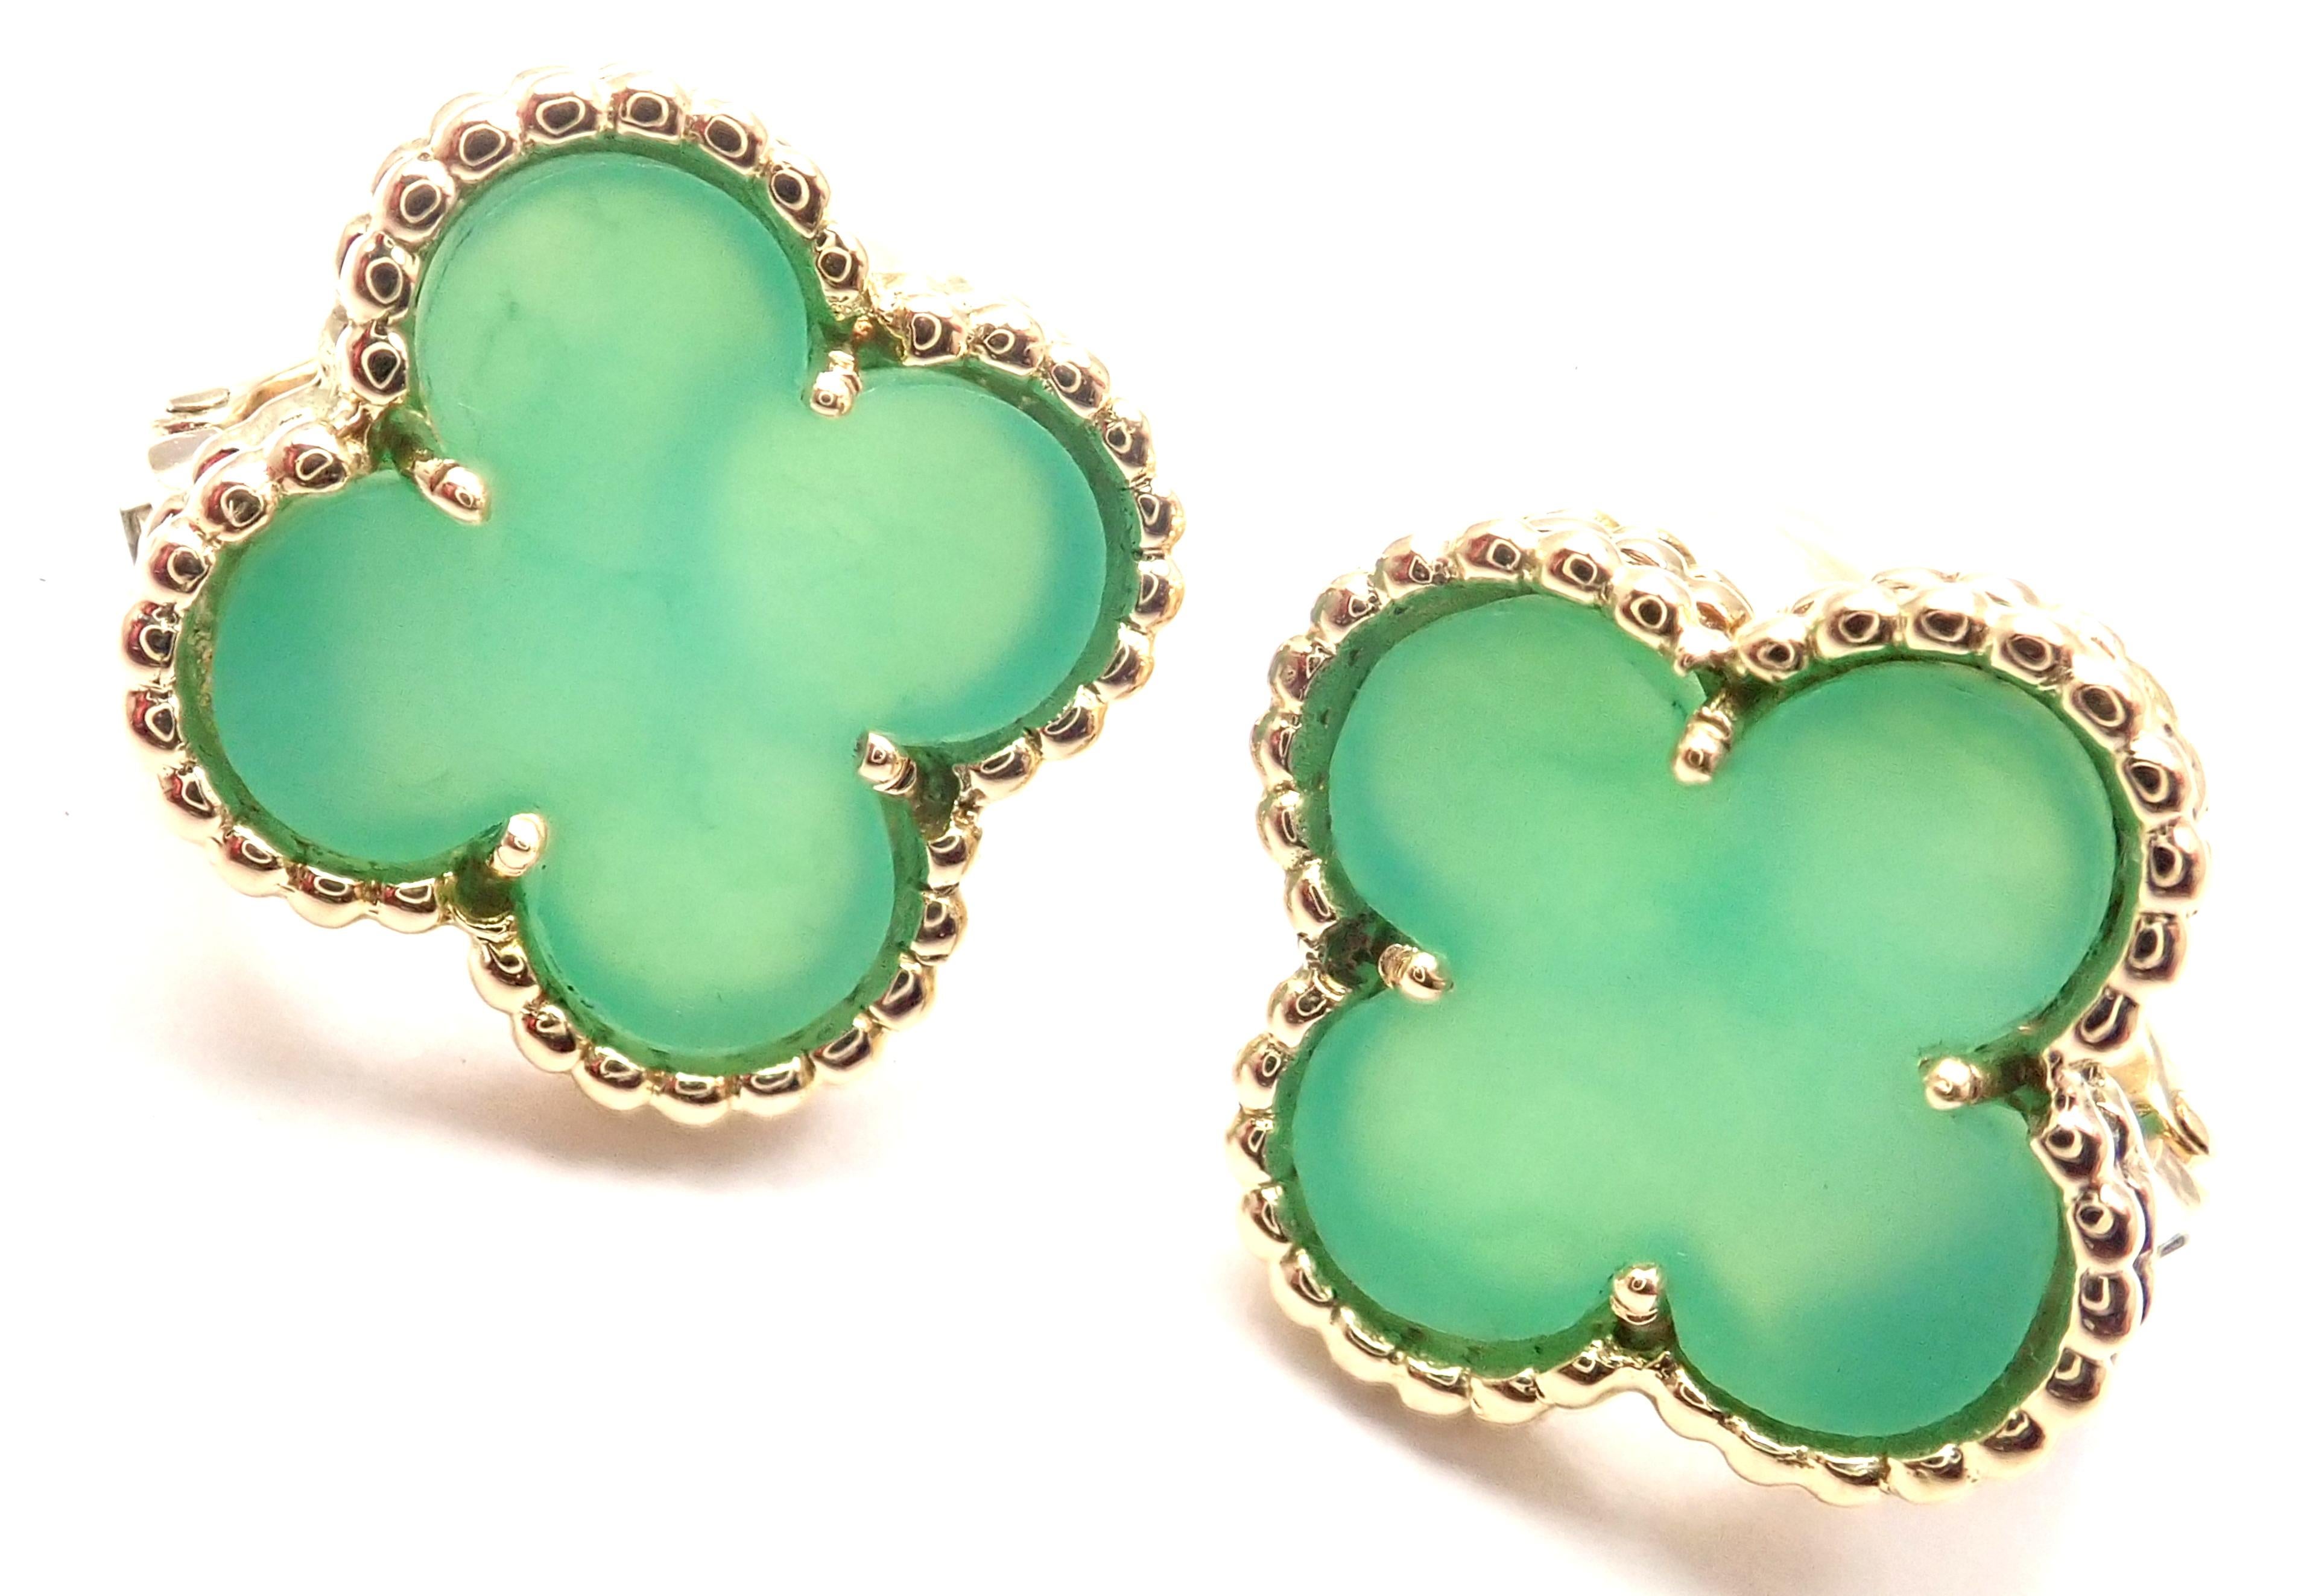 18k Yellow Gold Vintage Alhambra Green Chalcedony Earrings by Van Cleef & Arpels. 
With 2 green chalcedony stones: 15mm each.
These earrings are for non pierced ears, but they can be converted by adding posts.
Details: 
Measurements: 15mm x